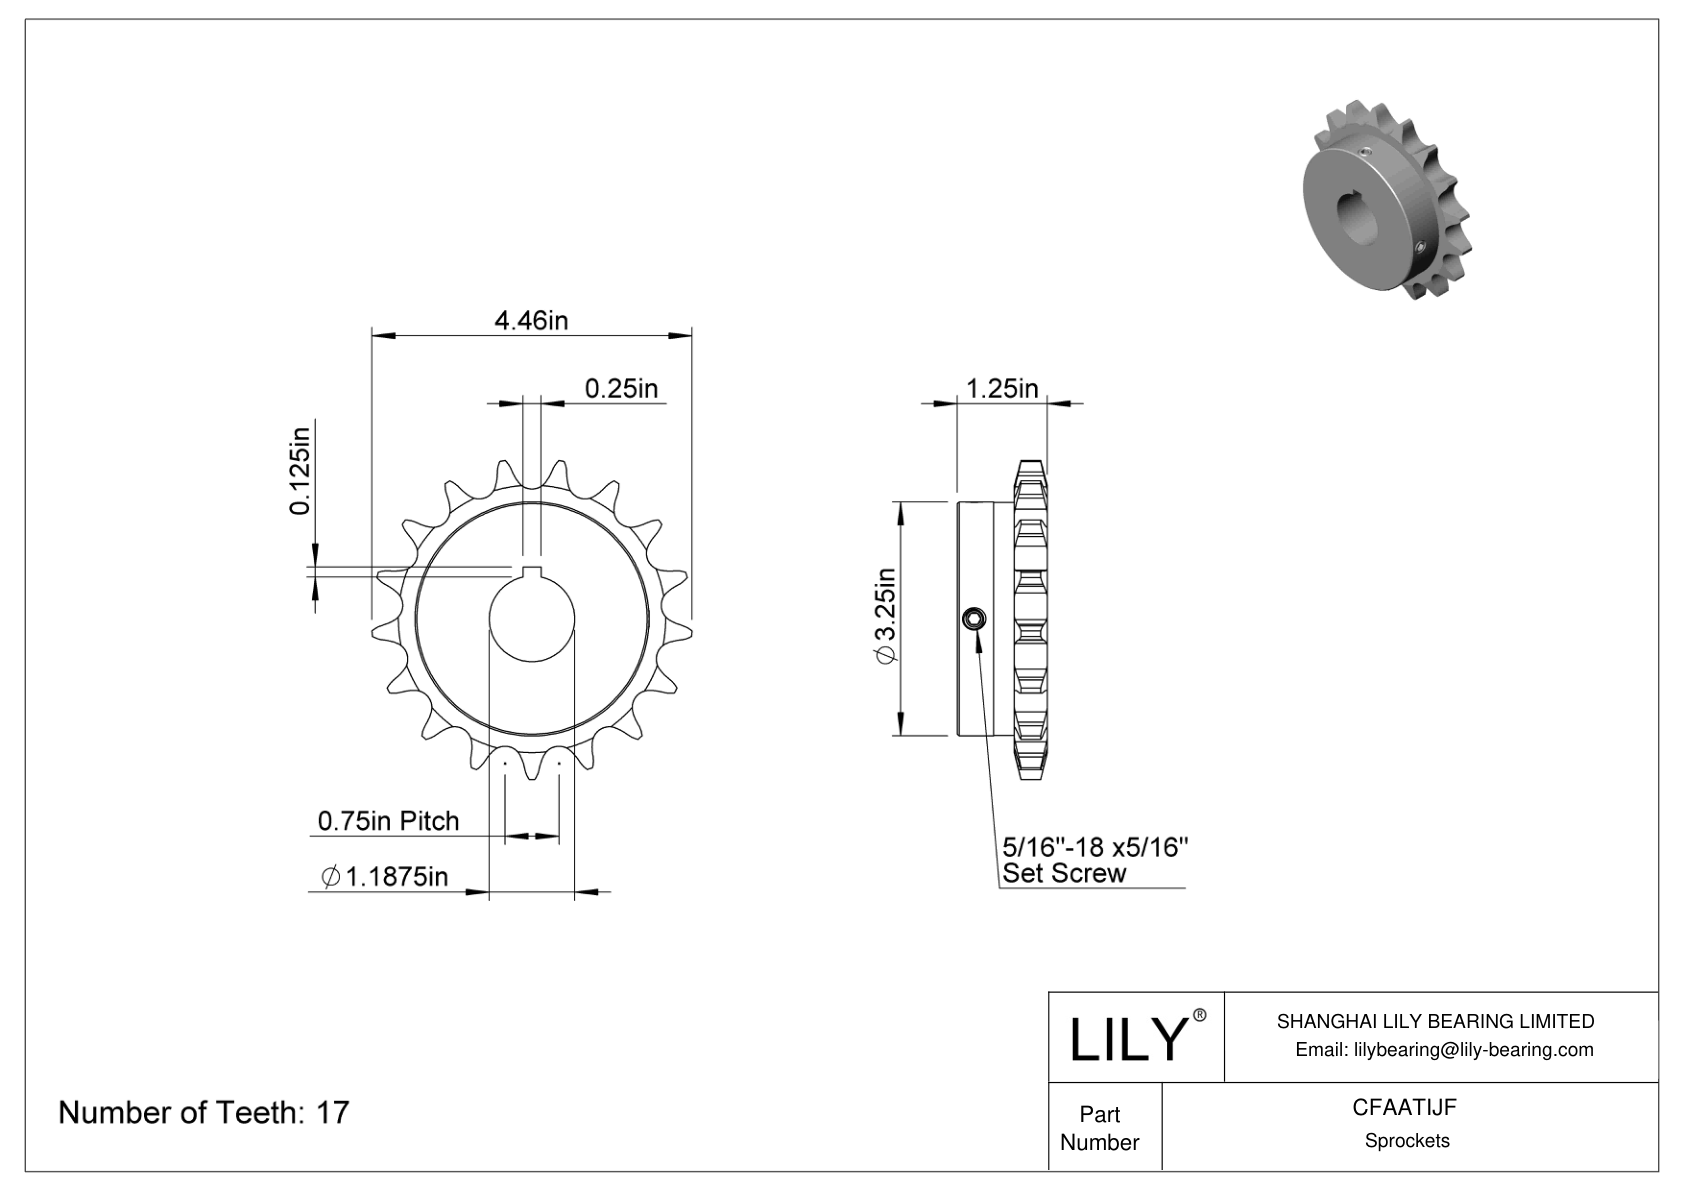 CFAATIJF Wear-Resistant Sprockets for ANSI Roller Chain cad drawing